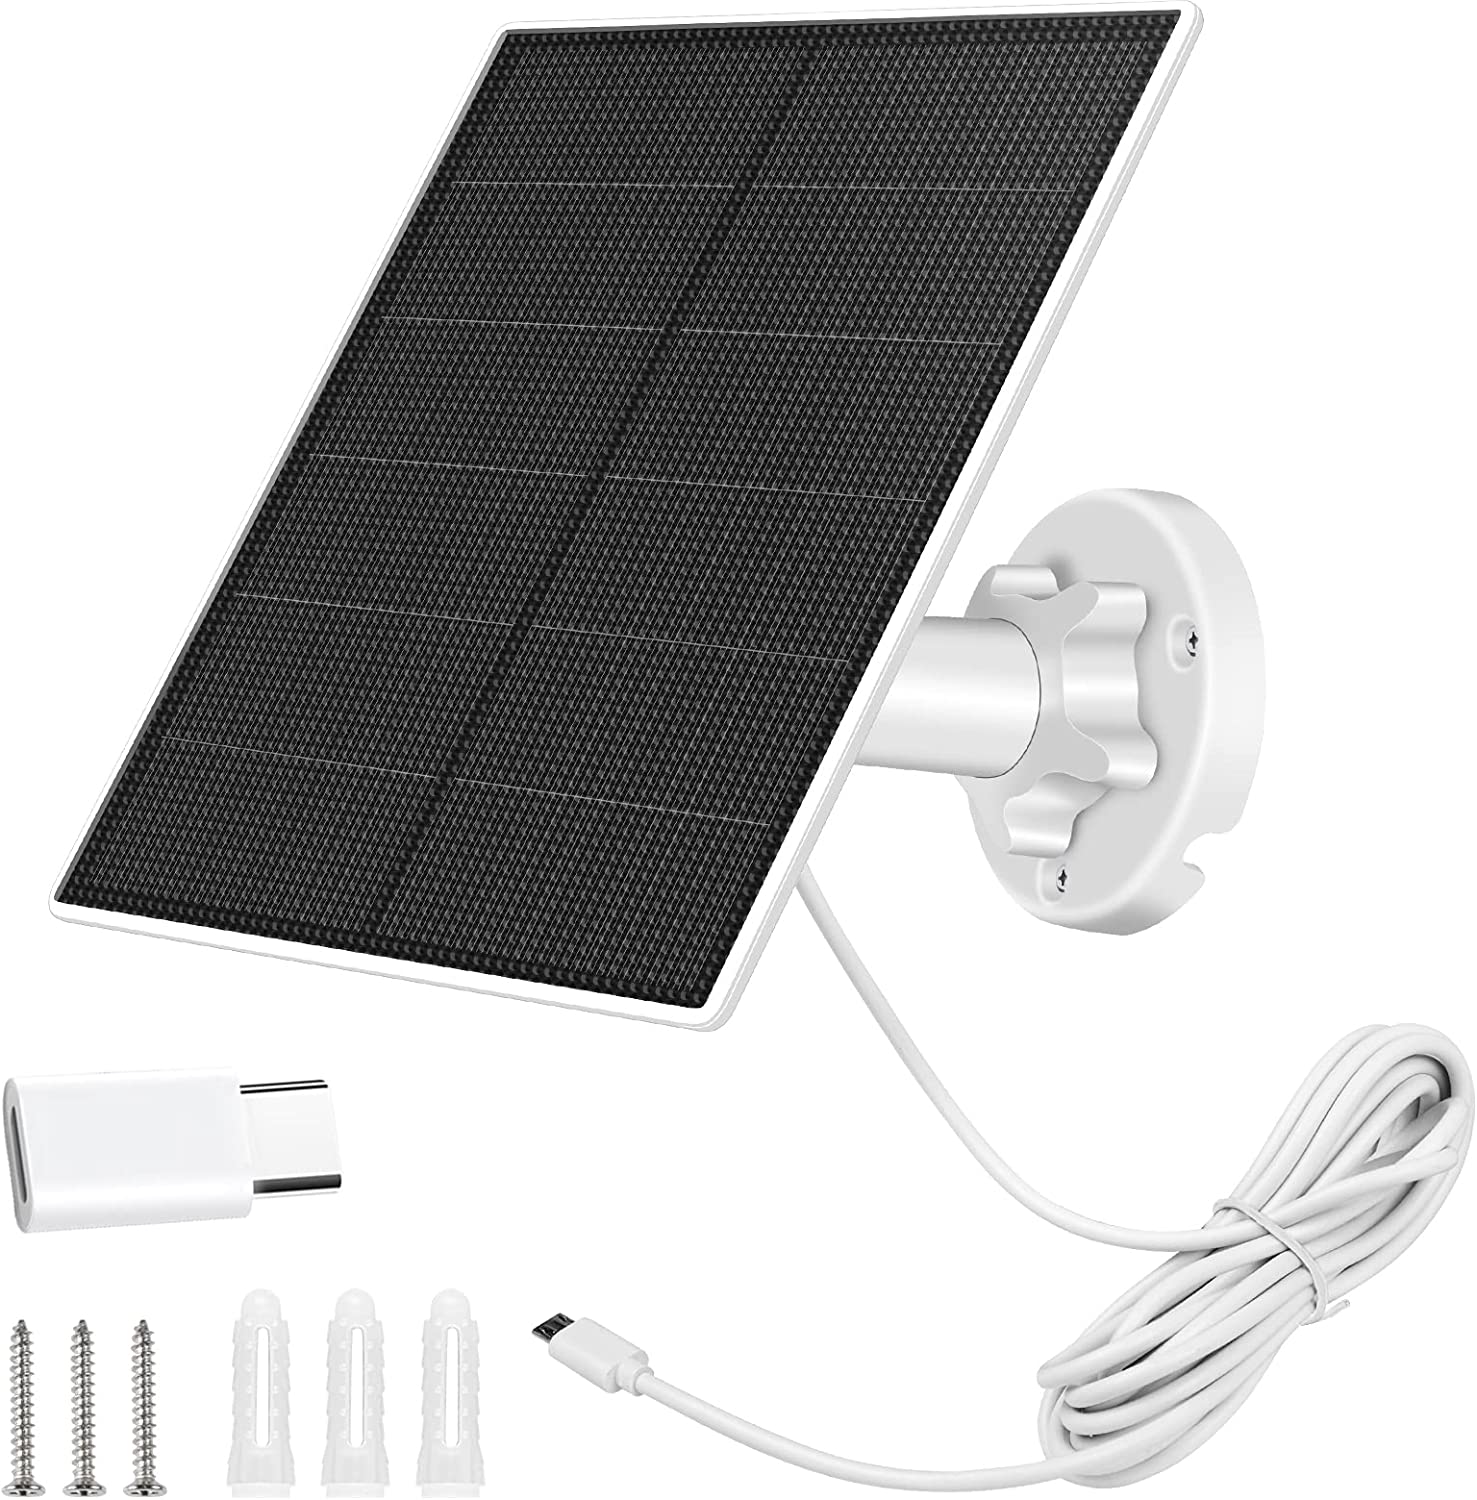 Solar Panel for Security Camera,5W USB Solar Panel for DC 5V Security Camera,Micro USB & USB-C Port Solar Panel,IP65 Waterproof Solar Charger for Camera with 360° Adjustable Mounting